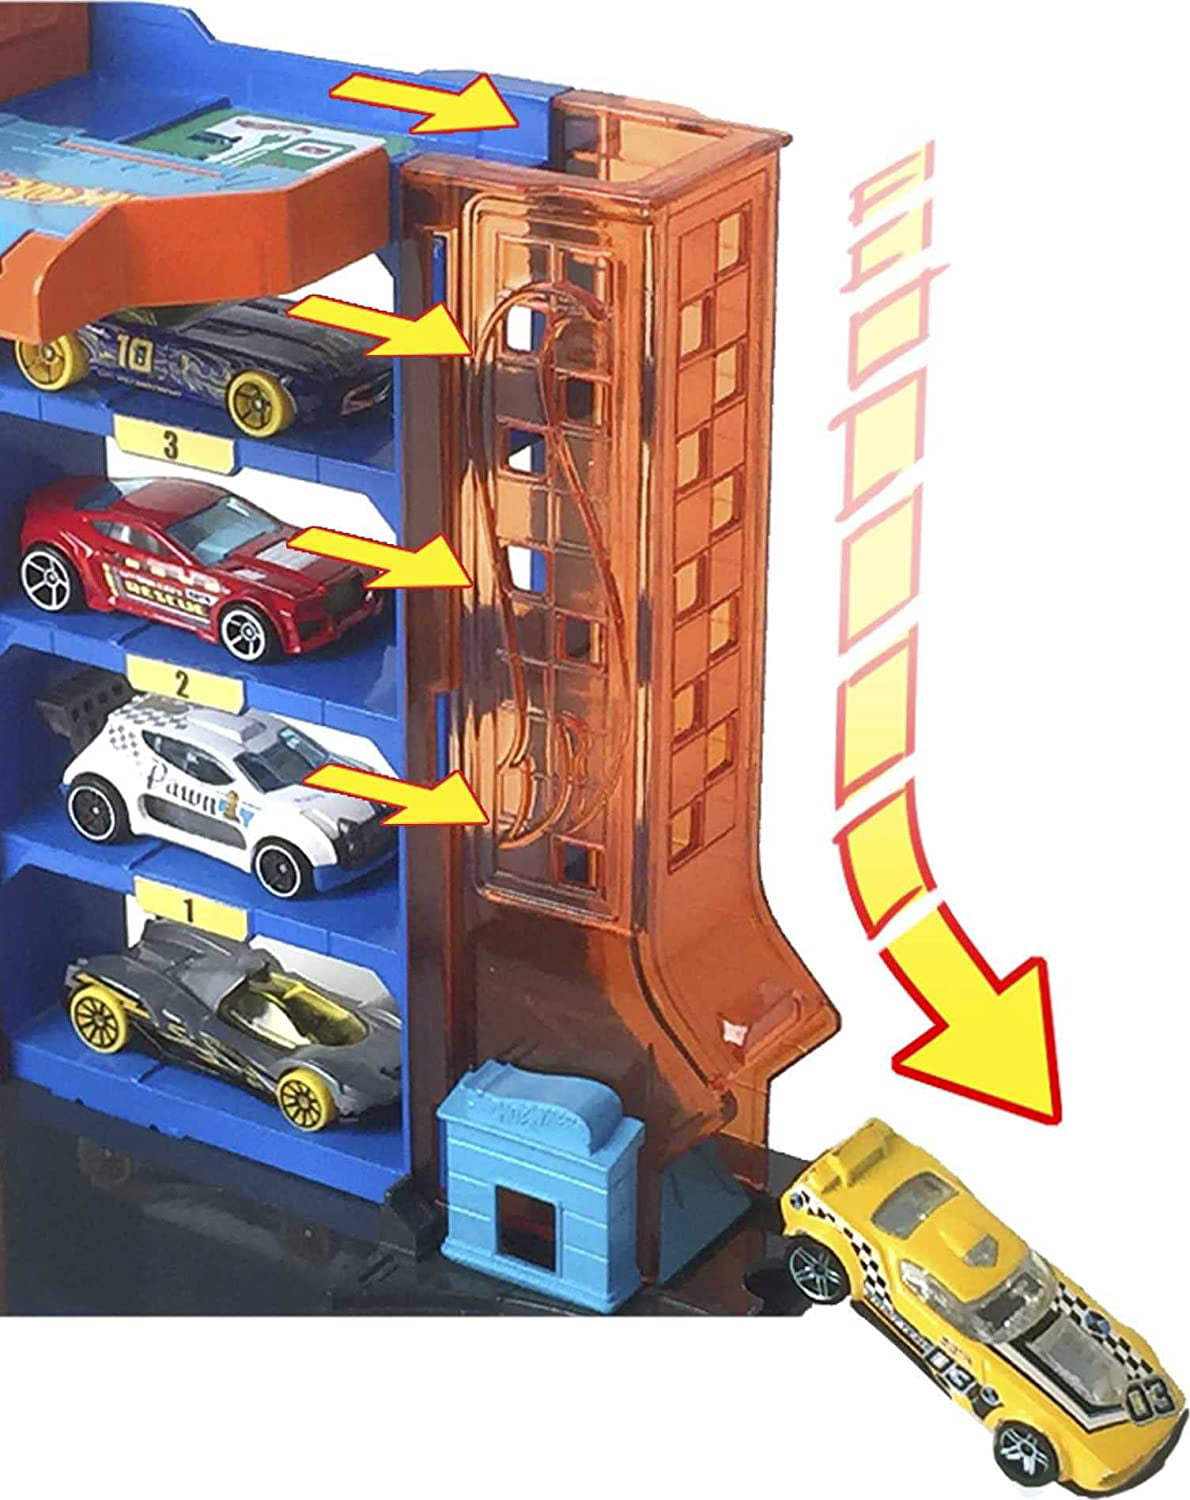 Hot Wheels City Car Park Playset, with 1 Car, Connects to Other Tracks & Playsets, Kids Ages 4 to Years Old - Walmart.com